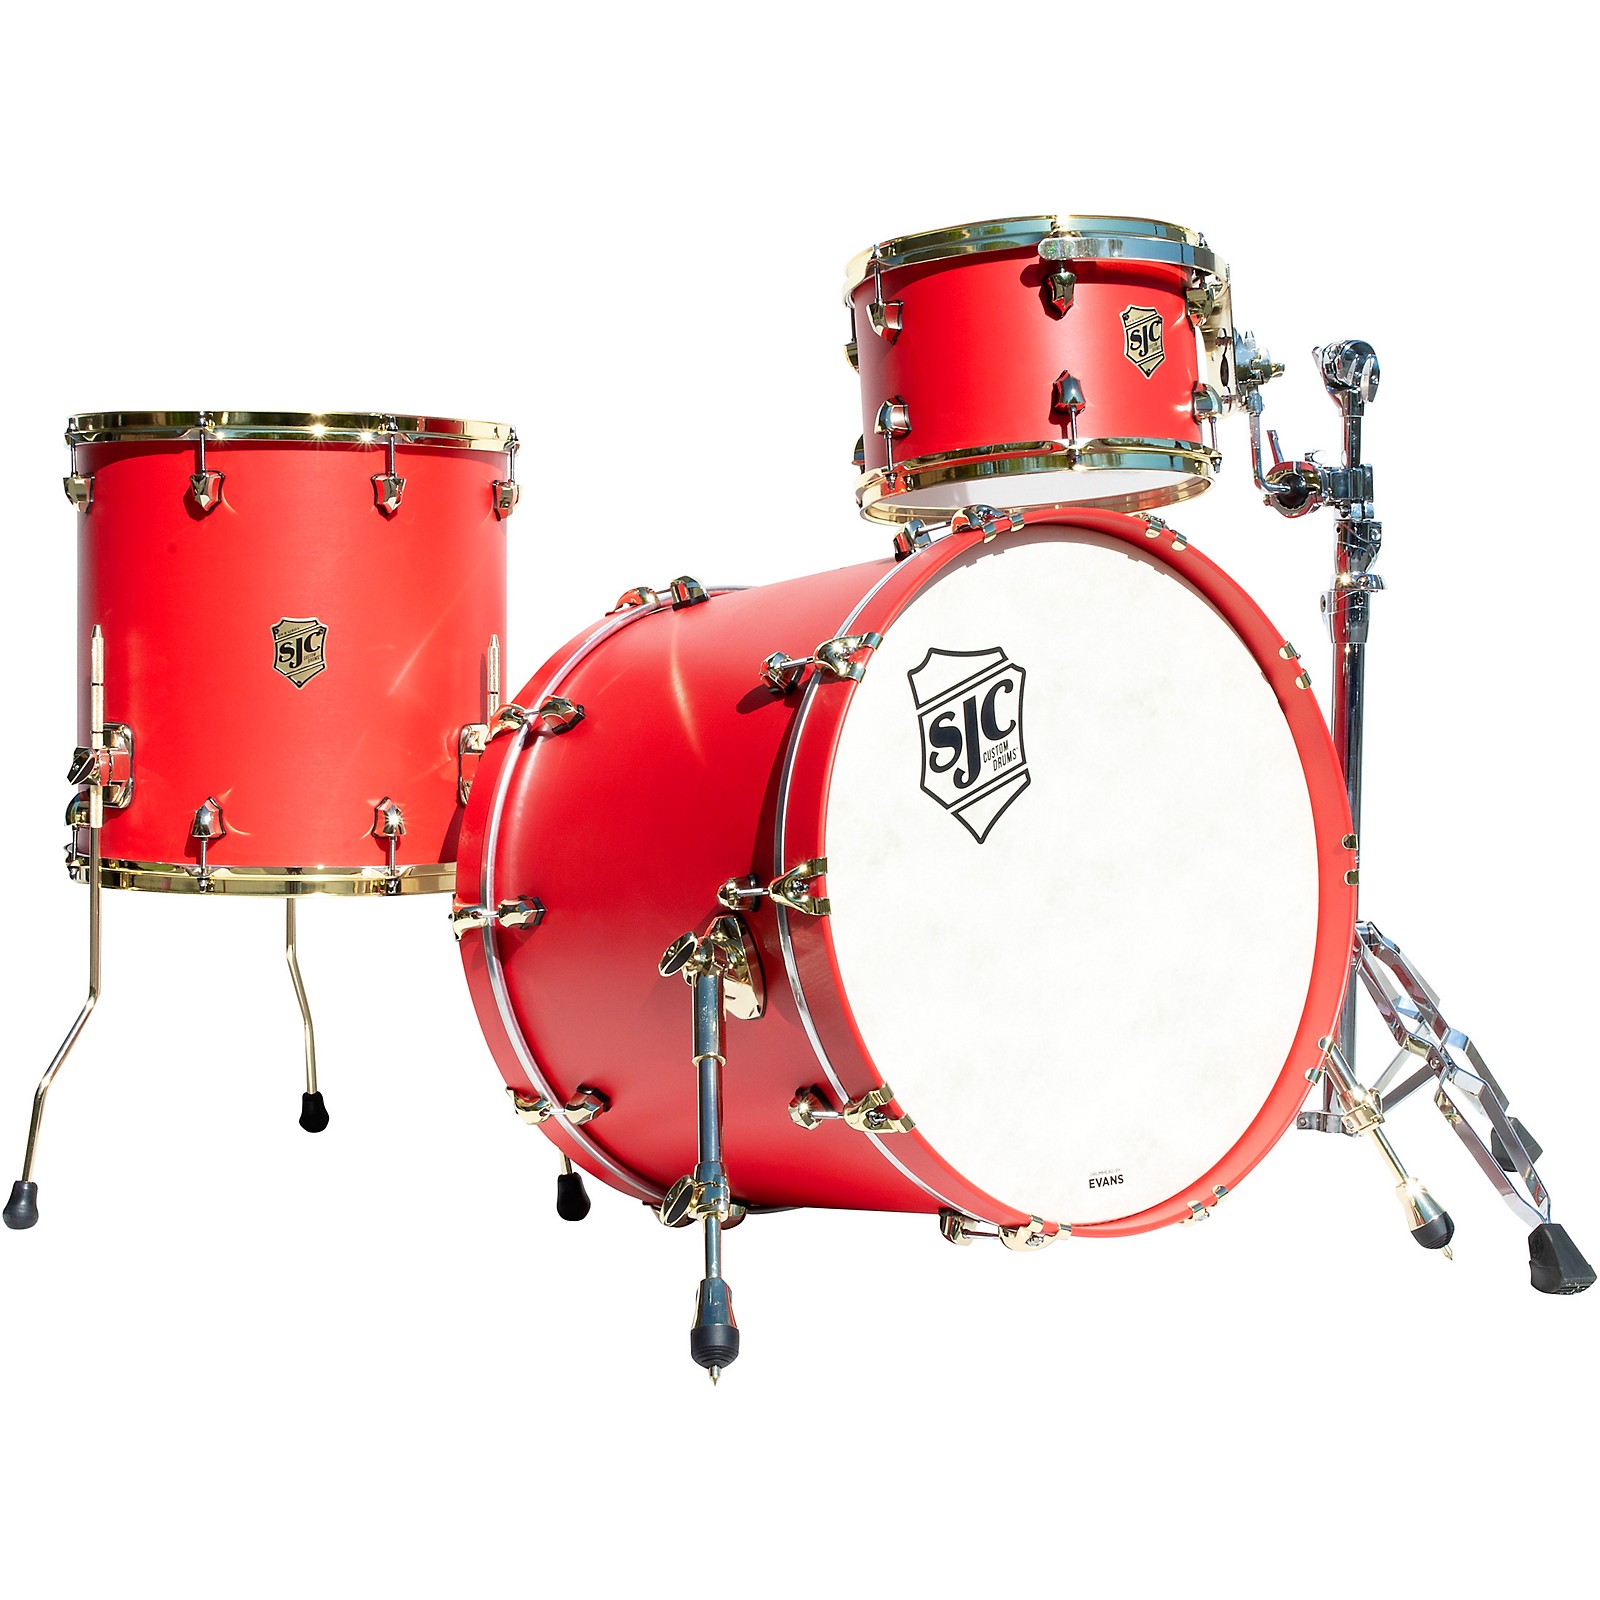 SJC Drums 3-Piece Tour Series Shell Pack with Brass Hardware Ruby Lacquer